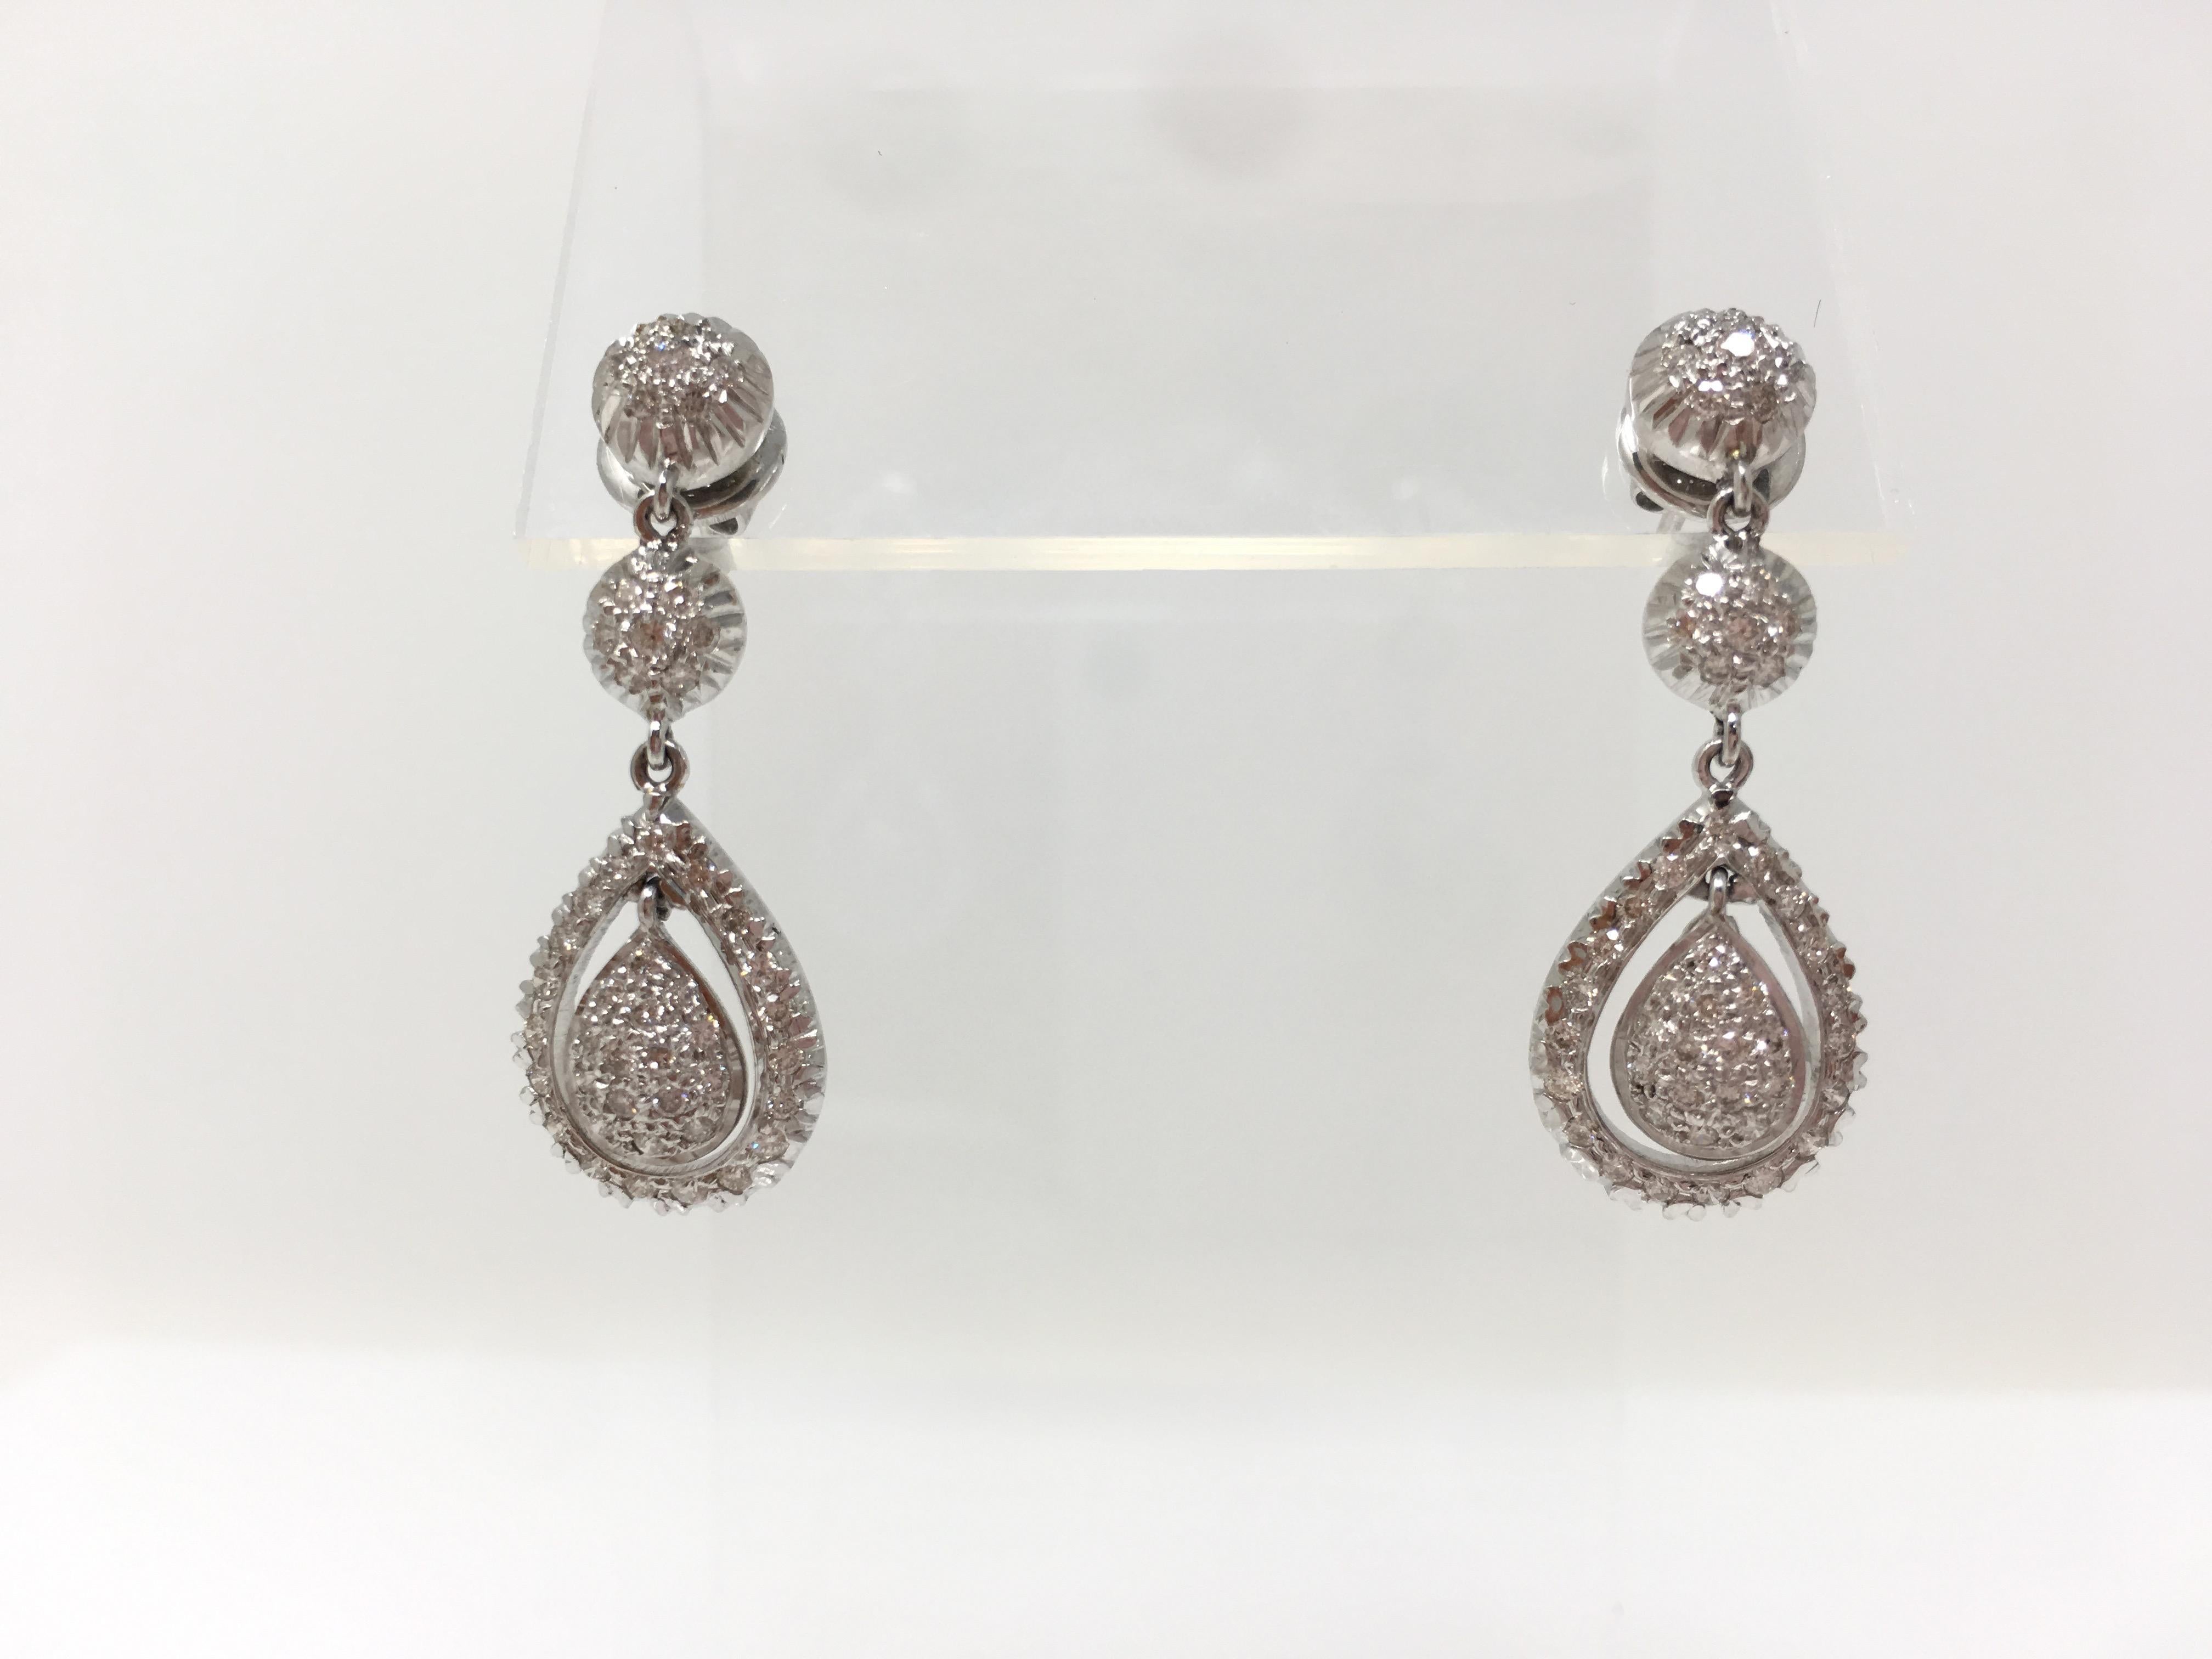 This gorgeous pendant set is beautifully custom hand made in 18k white gold. This pendant set includes pave set white round brilliant diamonds dangle earrings weighing 0.91 carat ( VS clarity and GH color) and a pave set diamond pendant weighing